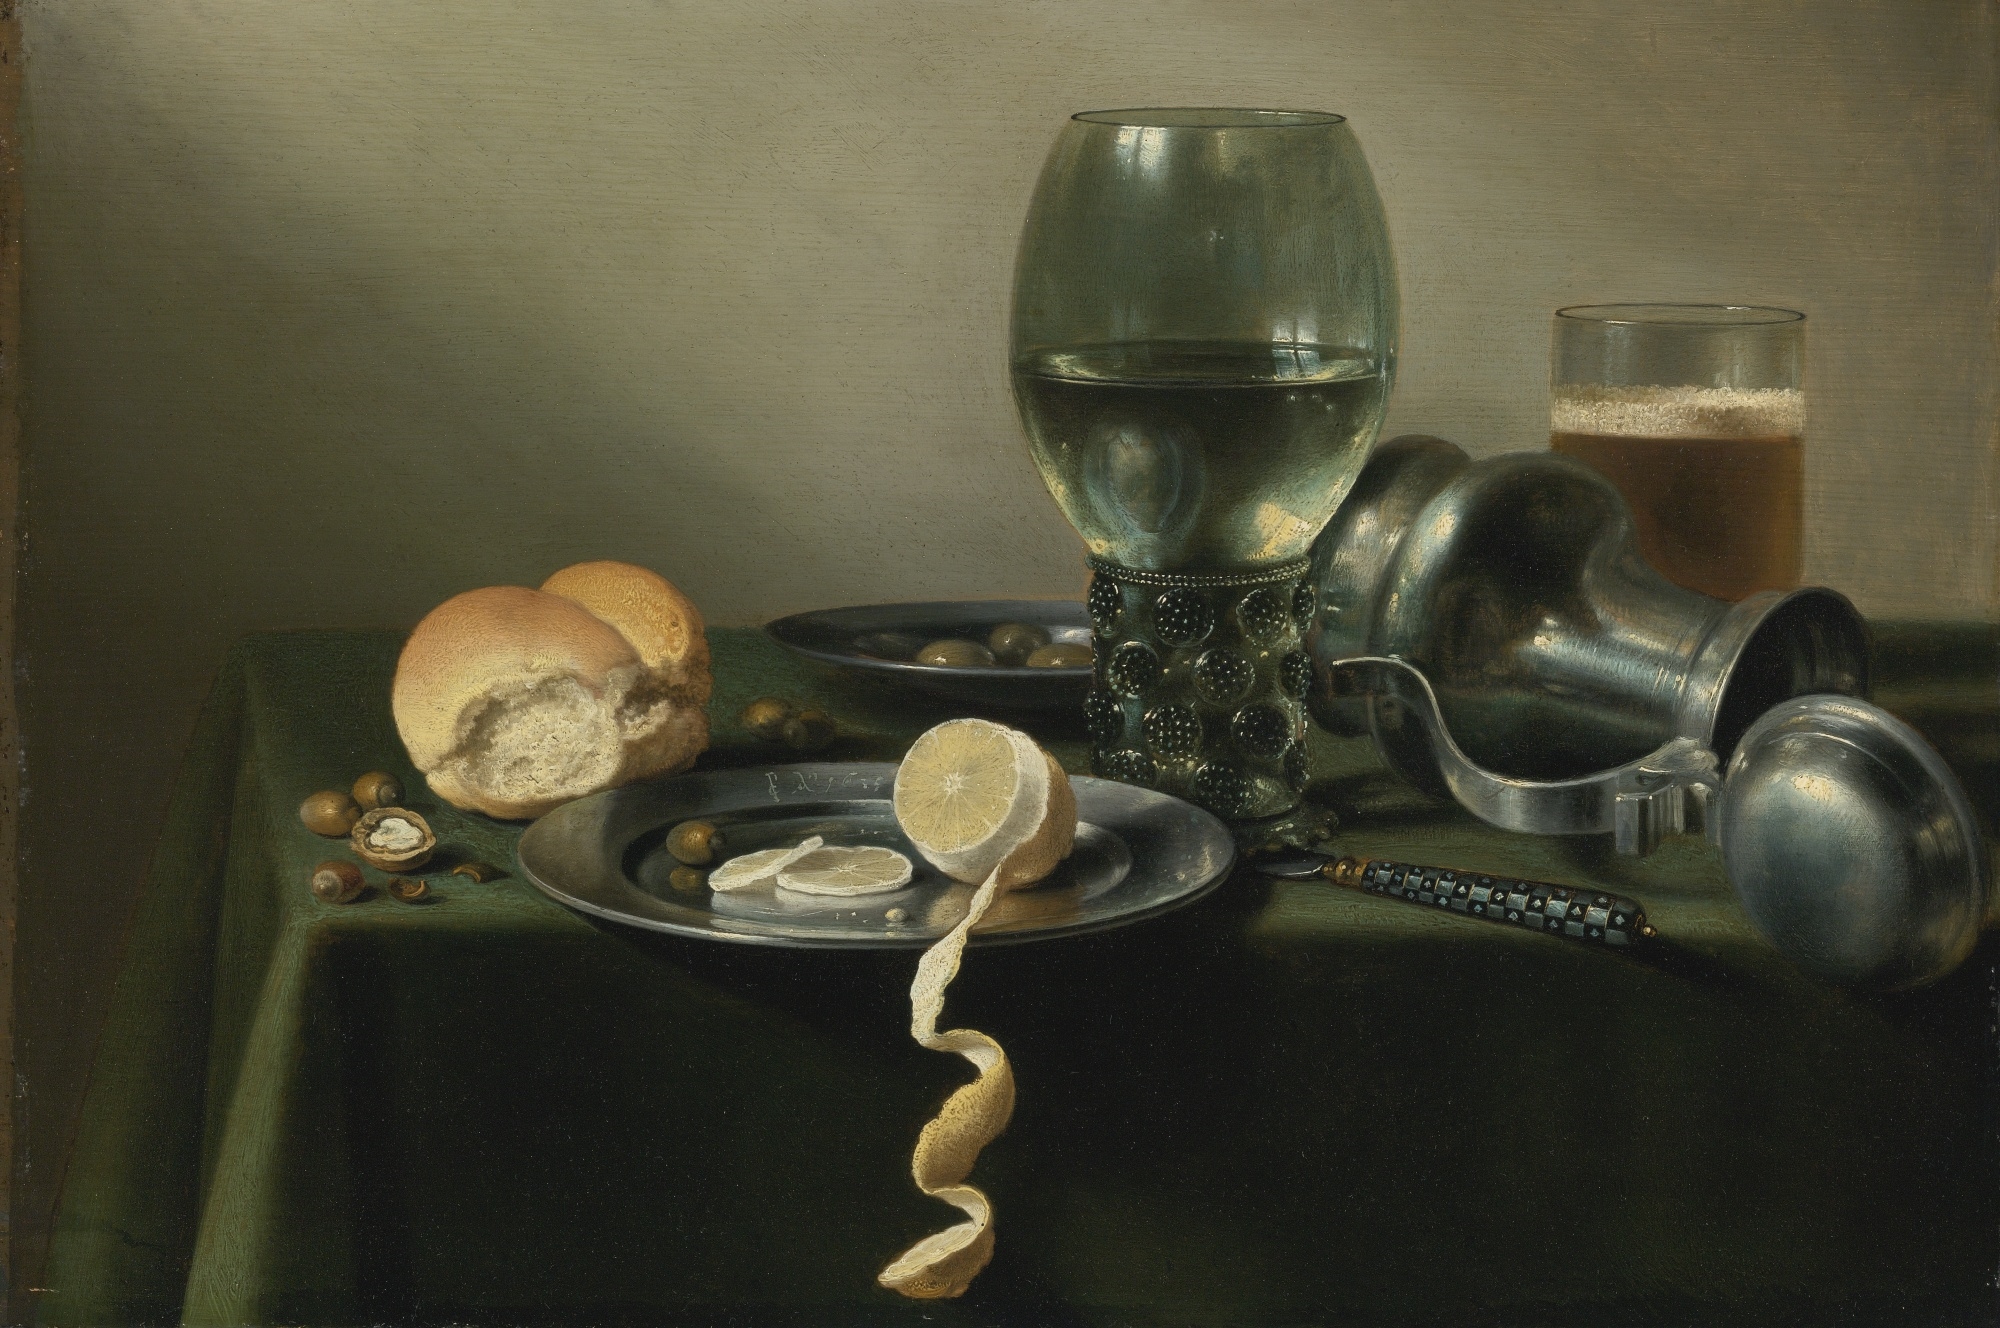 A ROEMER, AN OVERTURNED PEWTER JUG, OLIVES AND A HALF-PEELED LEMON ON PEWTER PLATES by Pieter Claesz, 1635